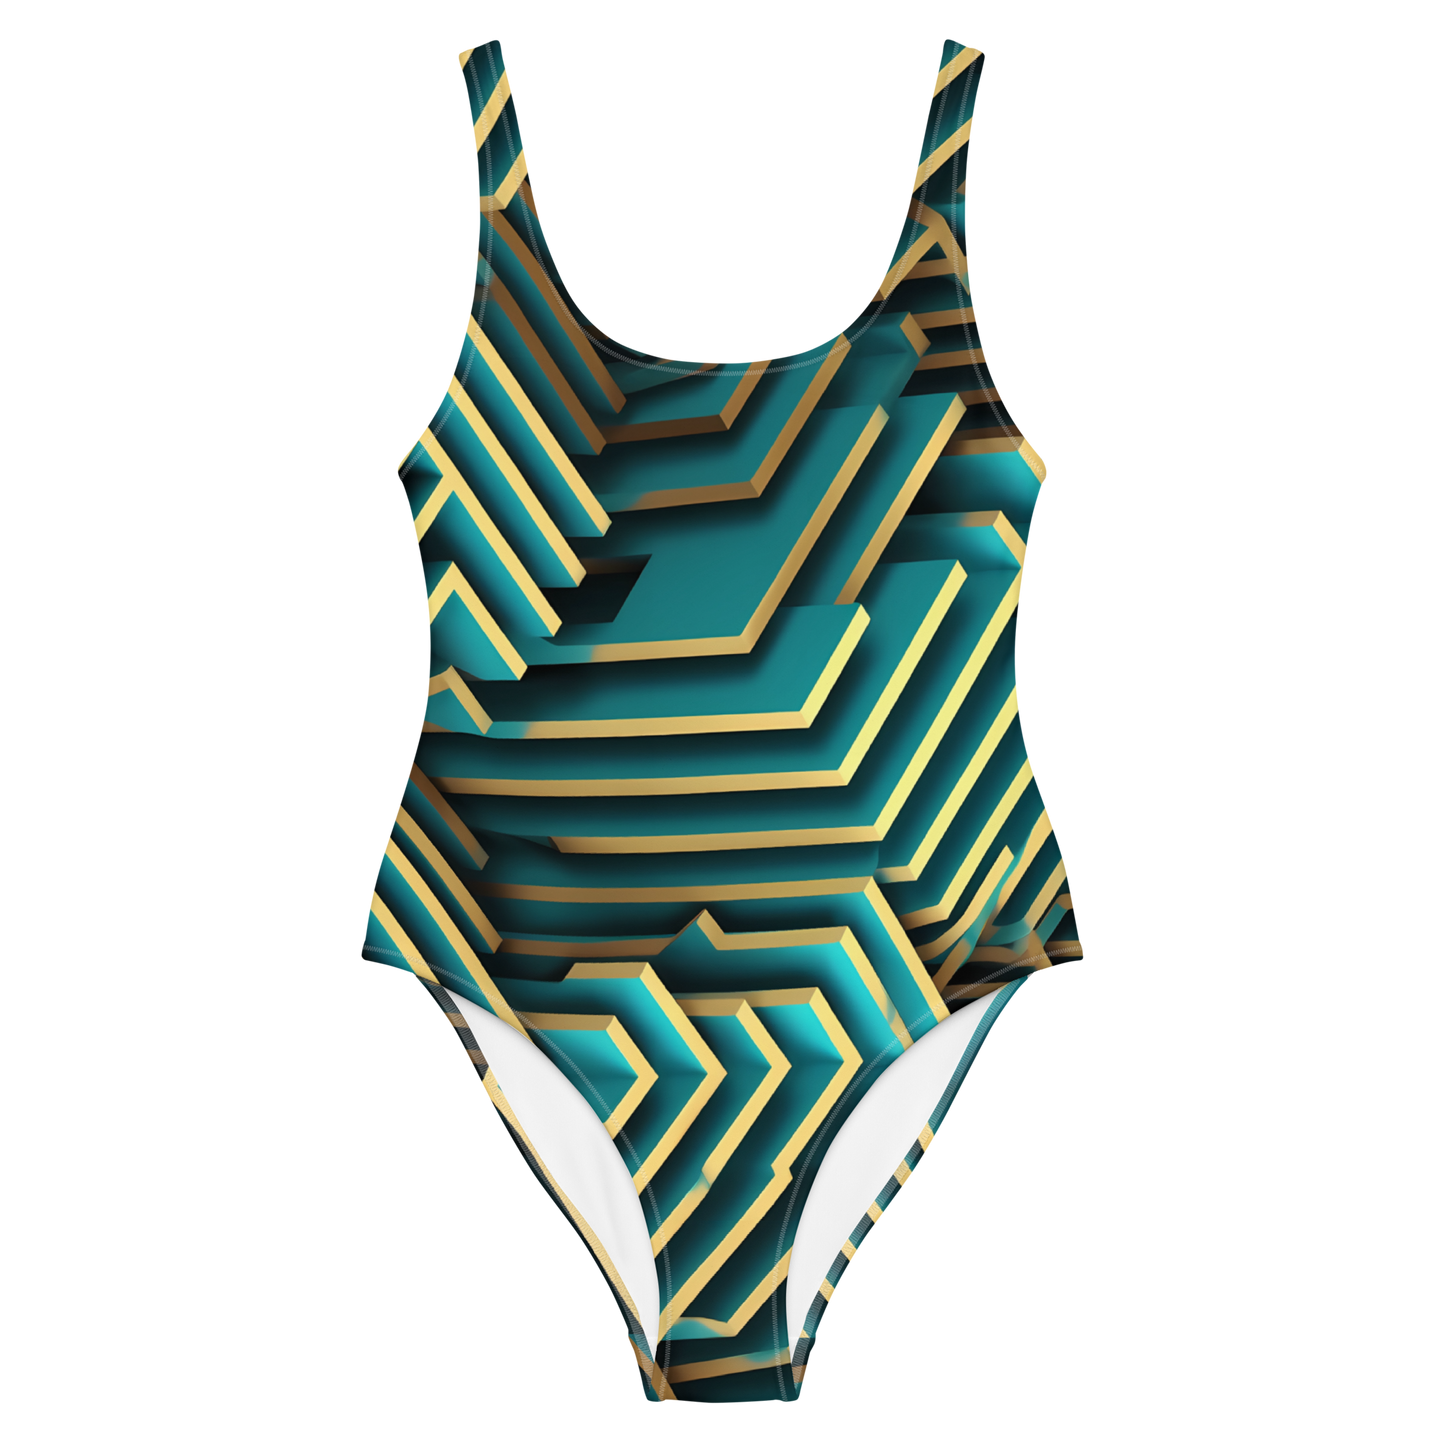 3D Maze Illusion | 3D Patterns | All-Over Print One-Piece Swimsuit - #5